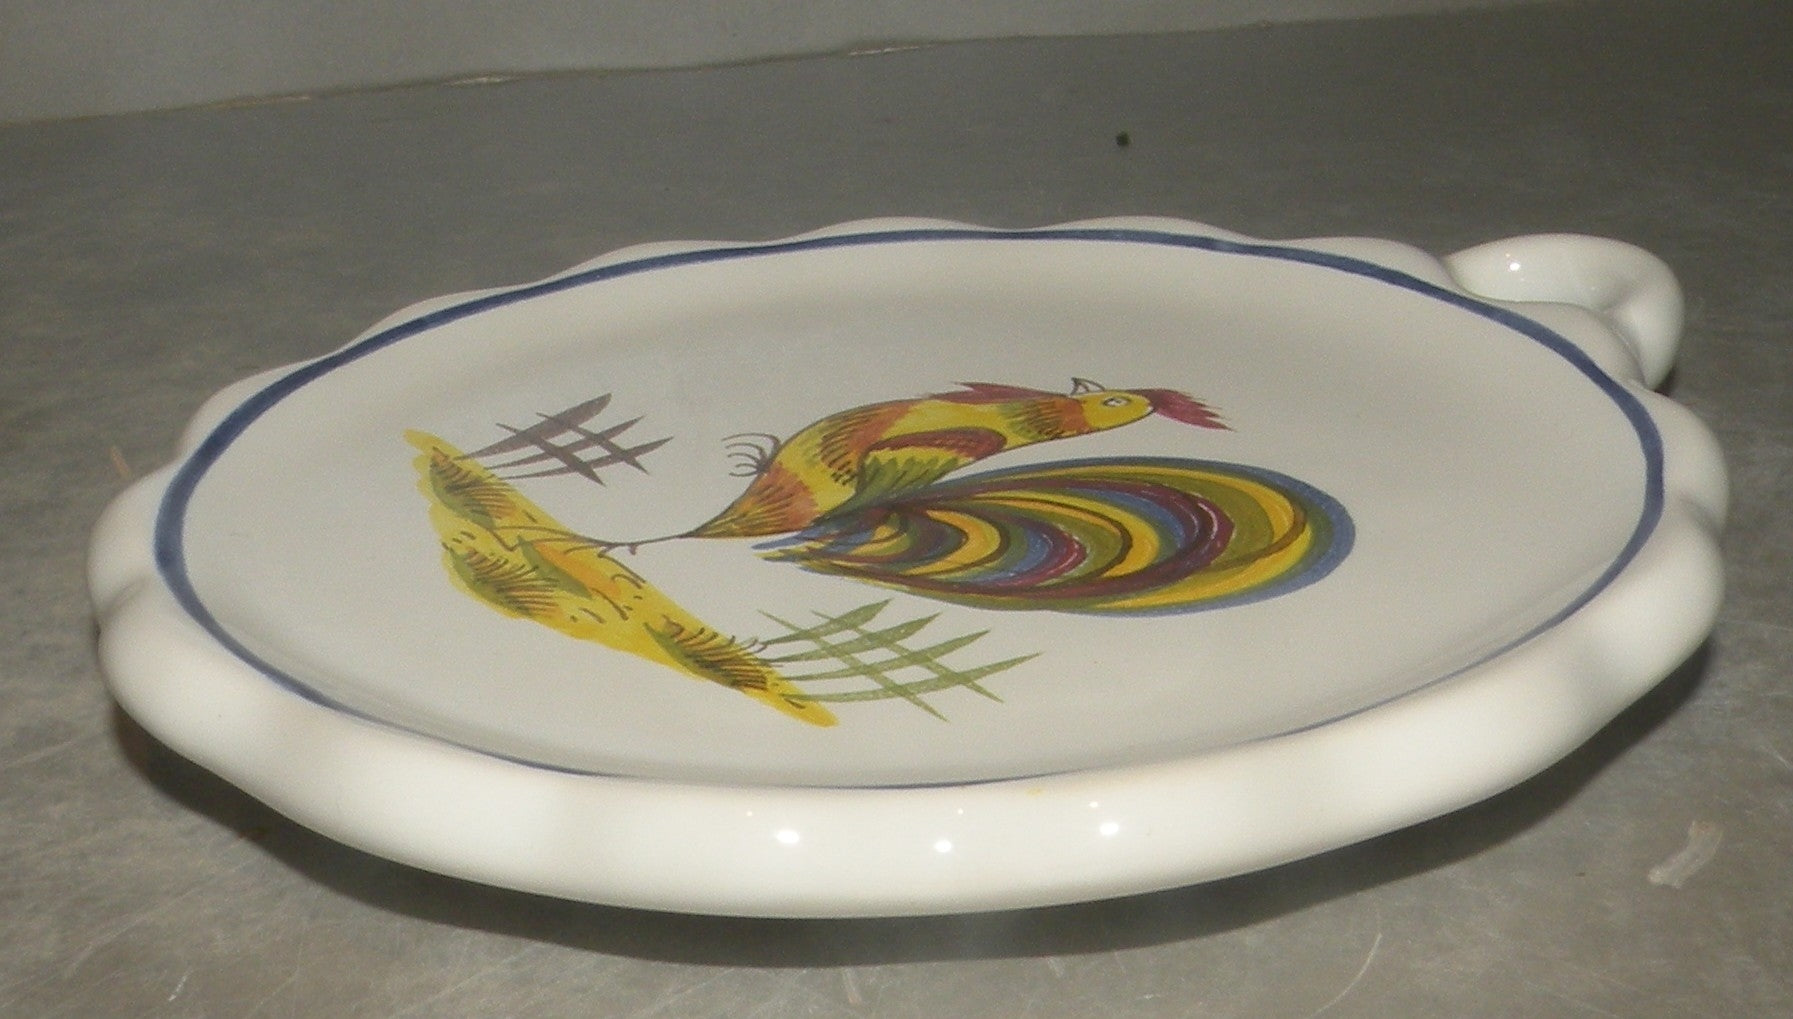 Dish with handle, Coq Francais